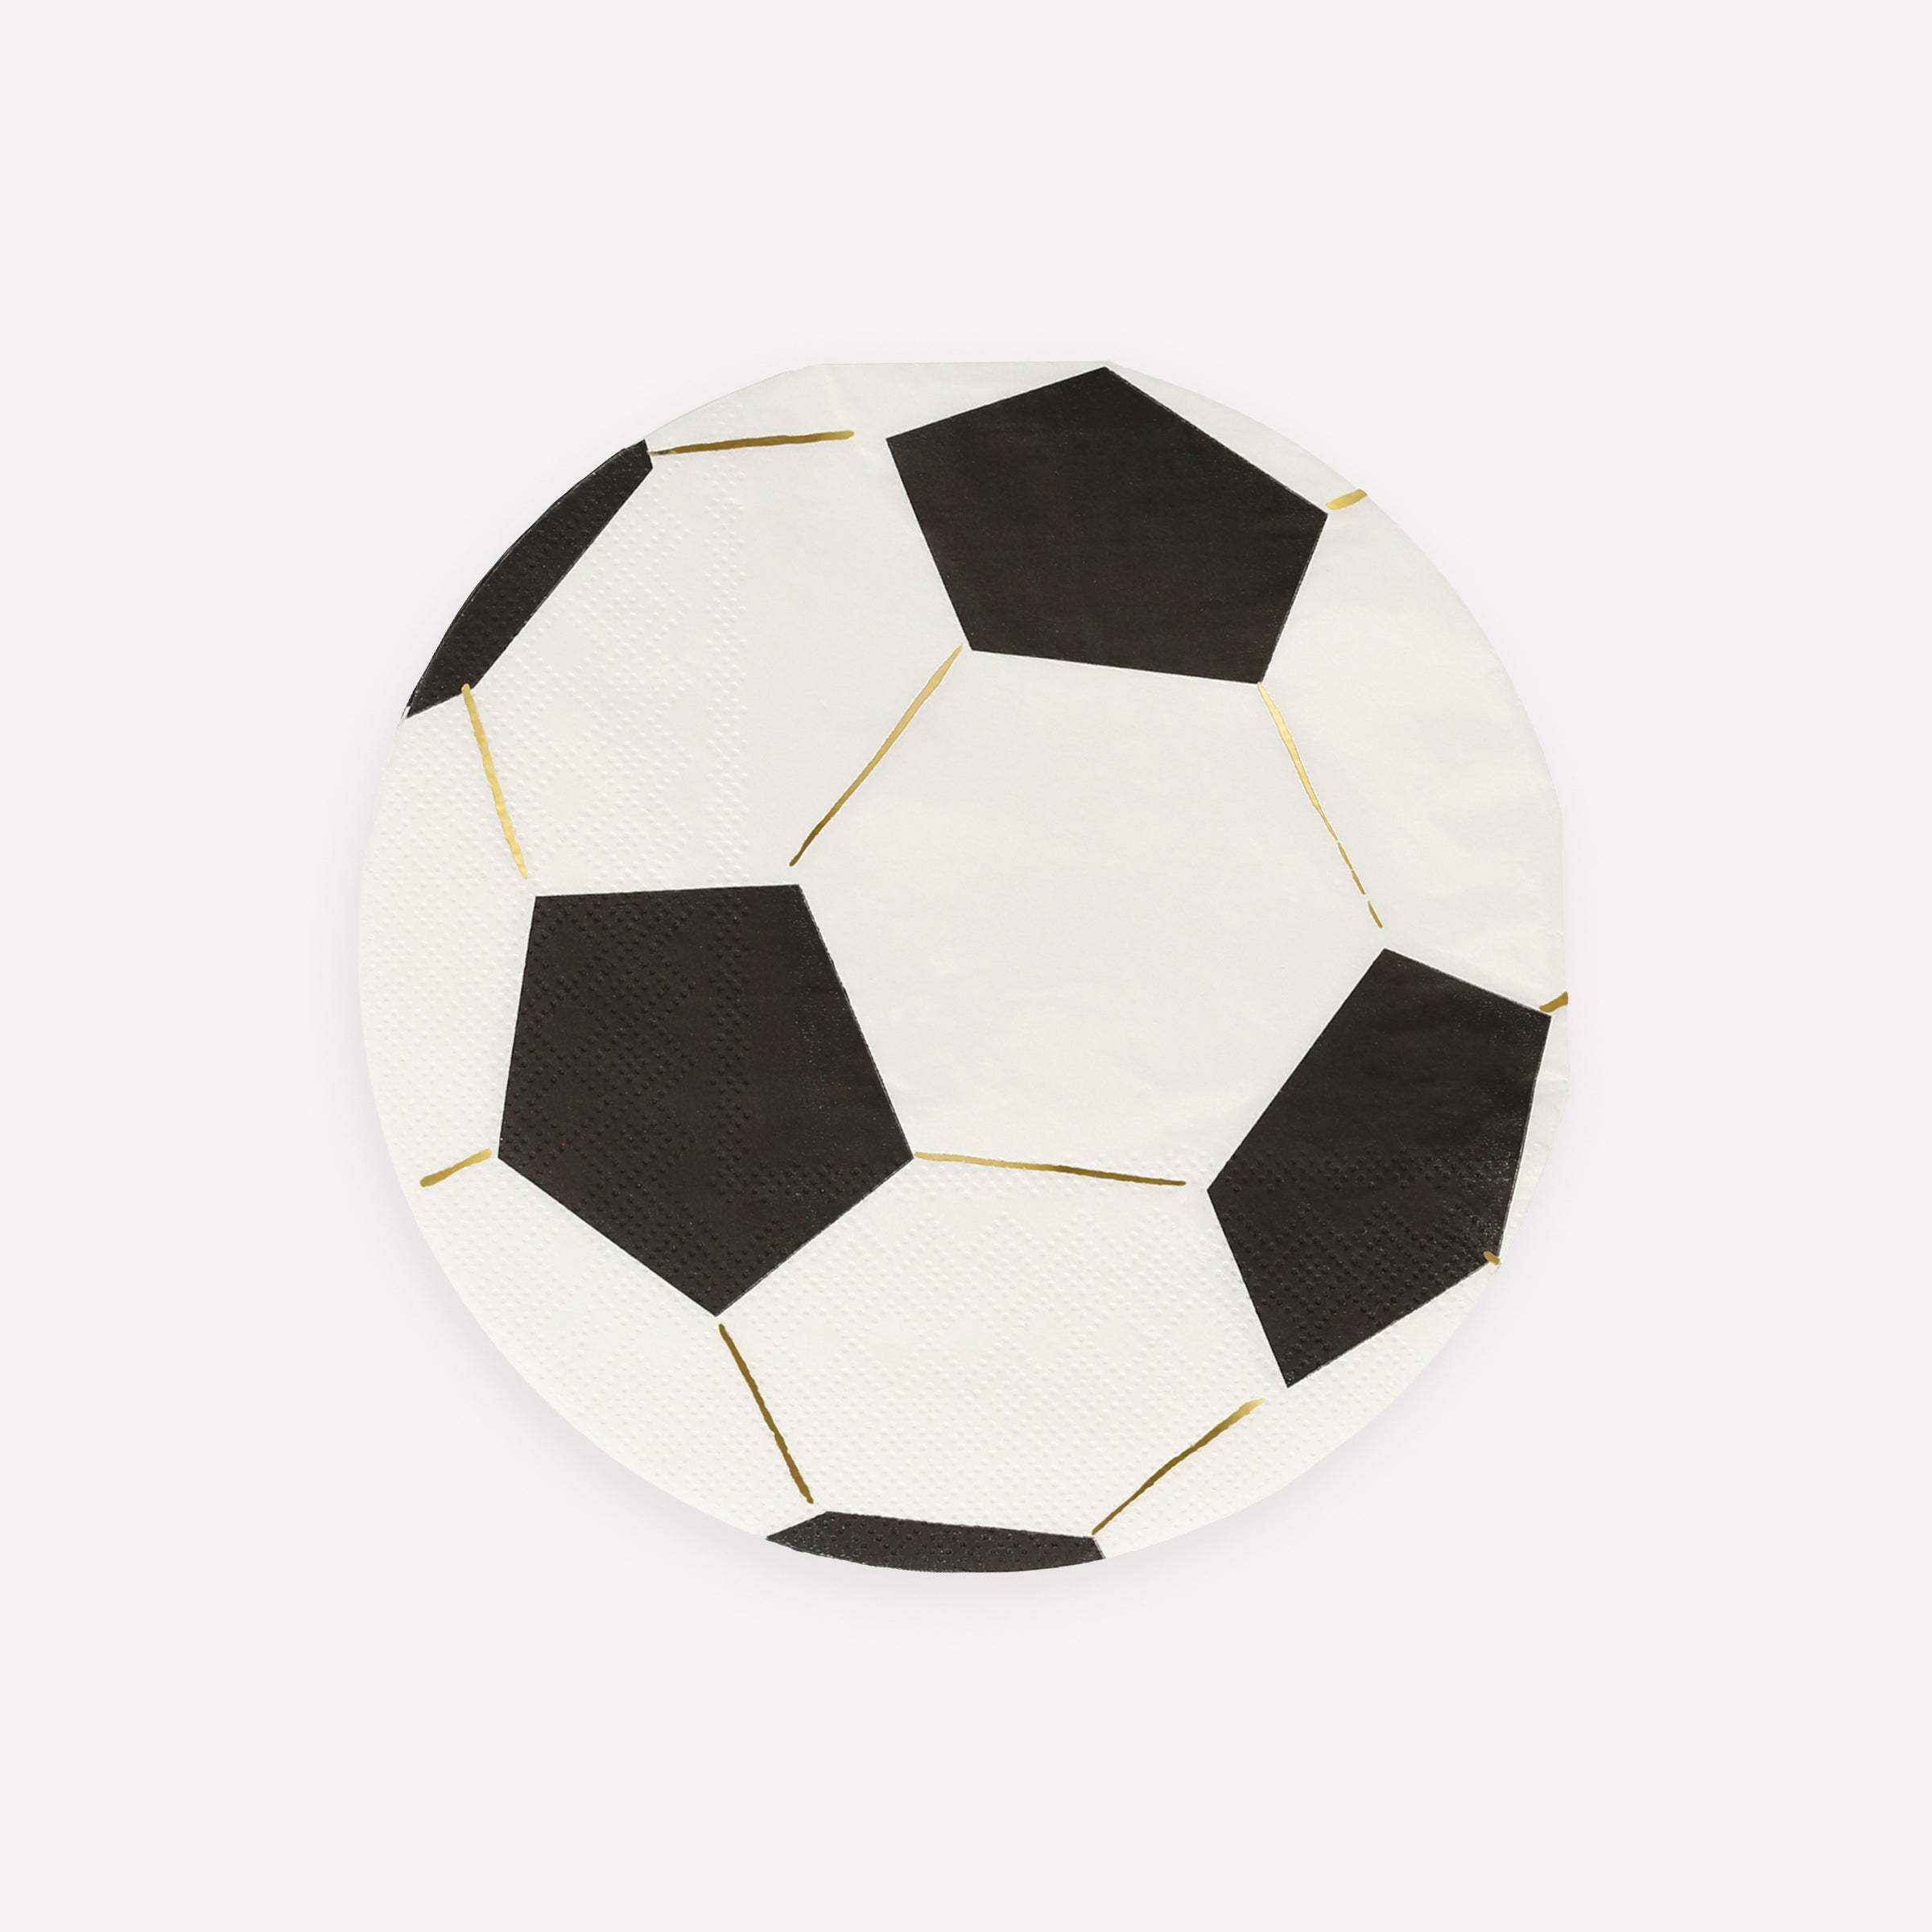 Our paper napkins are cut into the shape of a football with fabulous gold foil details.